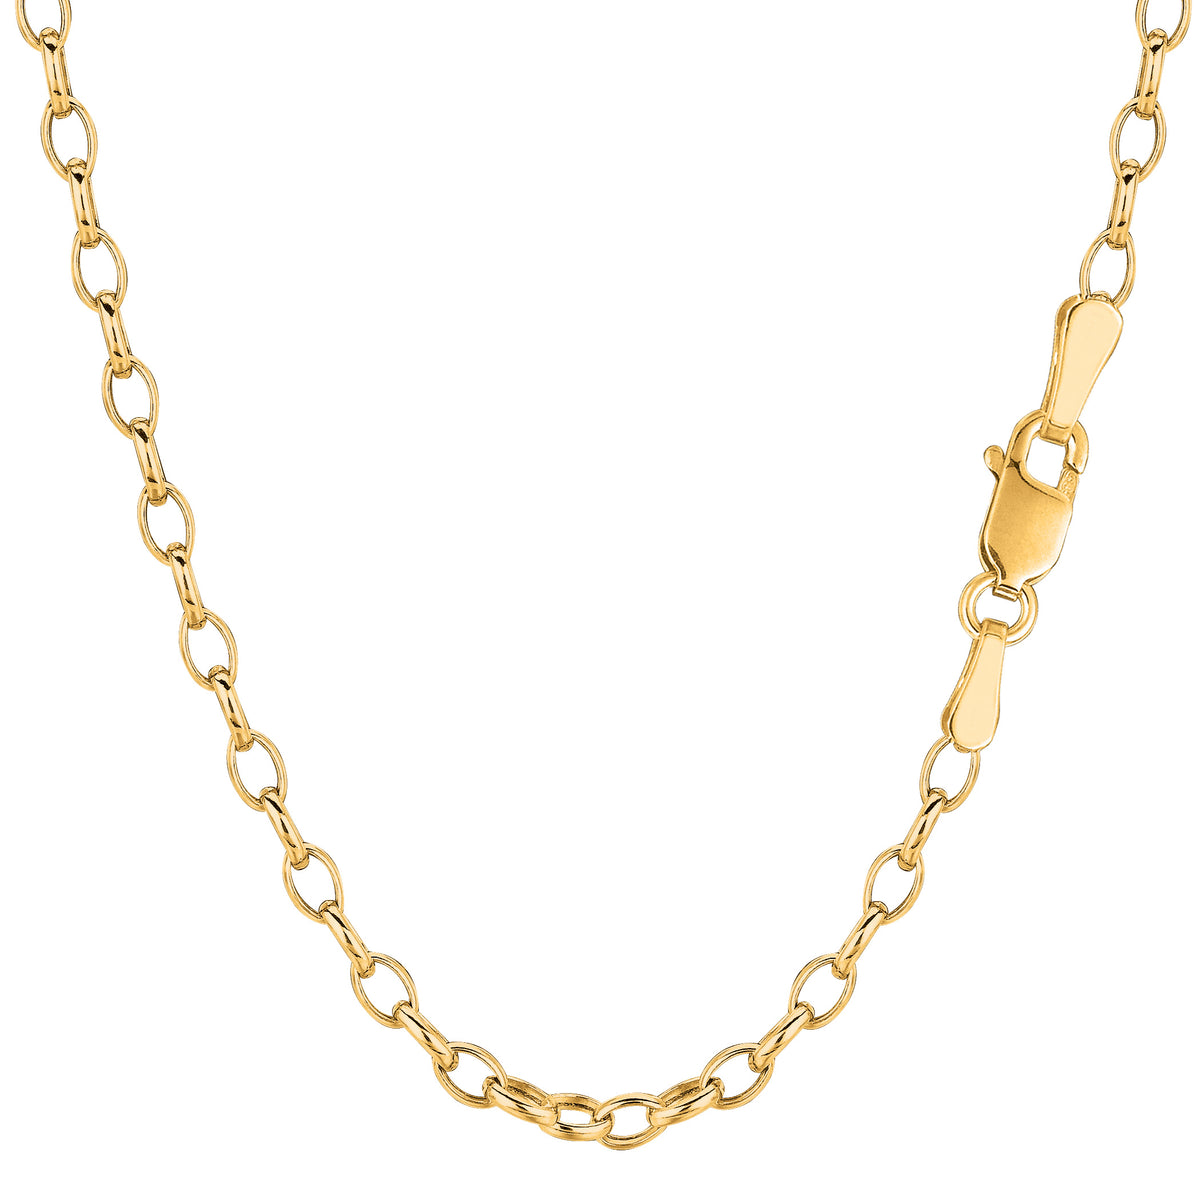 14k Yellow Gold Oval Rolo Link Chain Bracelet, 4.6mm, 7" fine designer jewelry for men and women